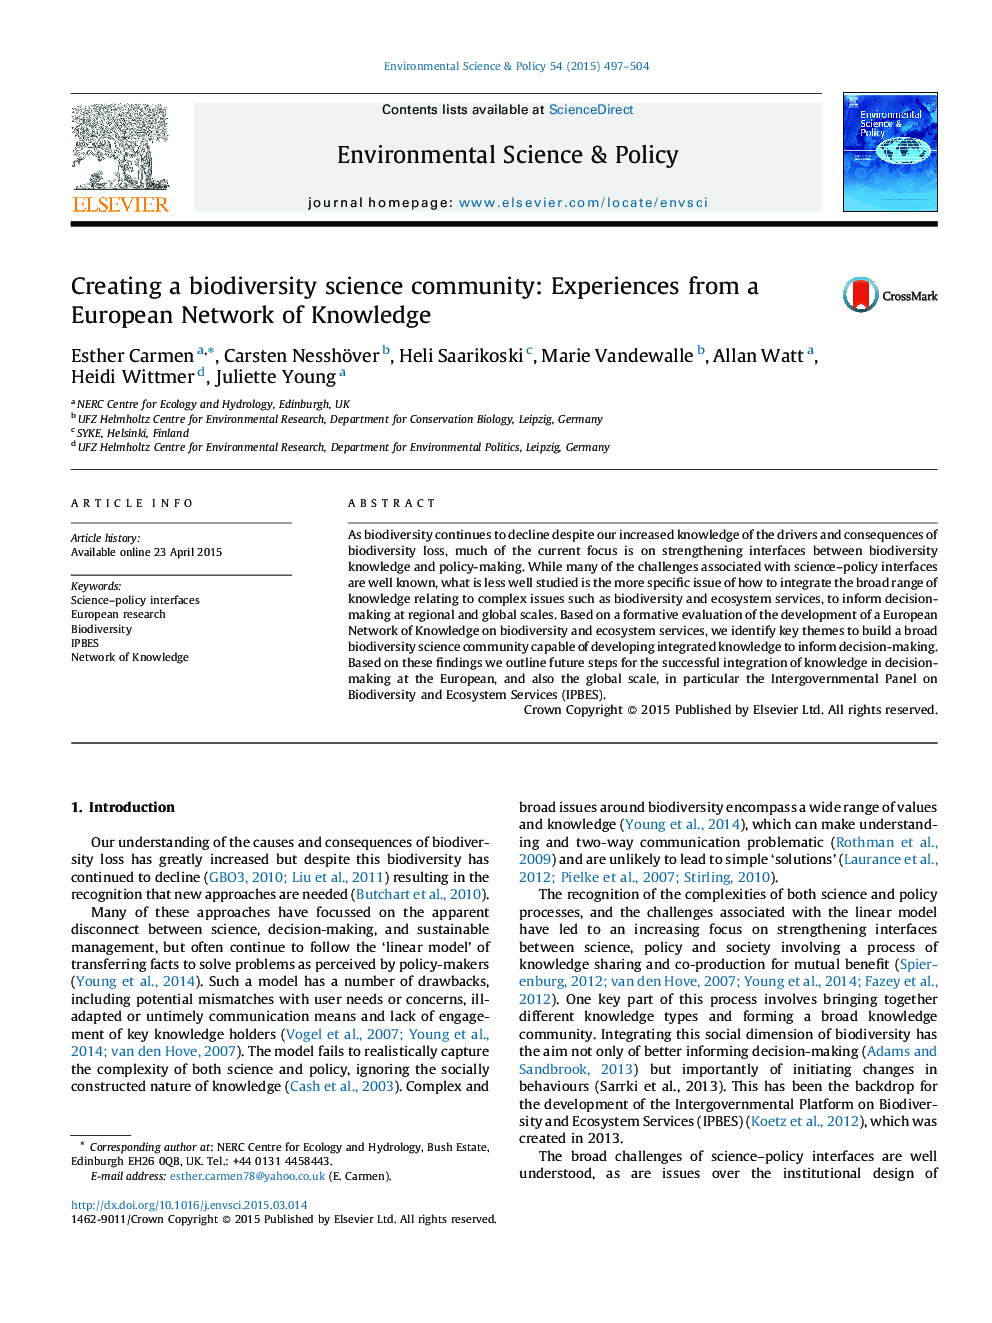 Creating a biodiversity science community: Experiences from a European Network of Knowledge